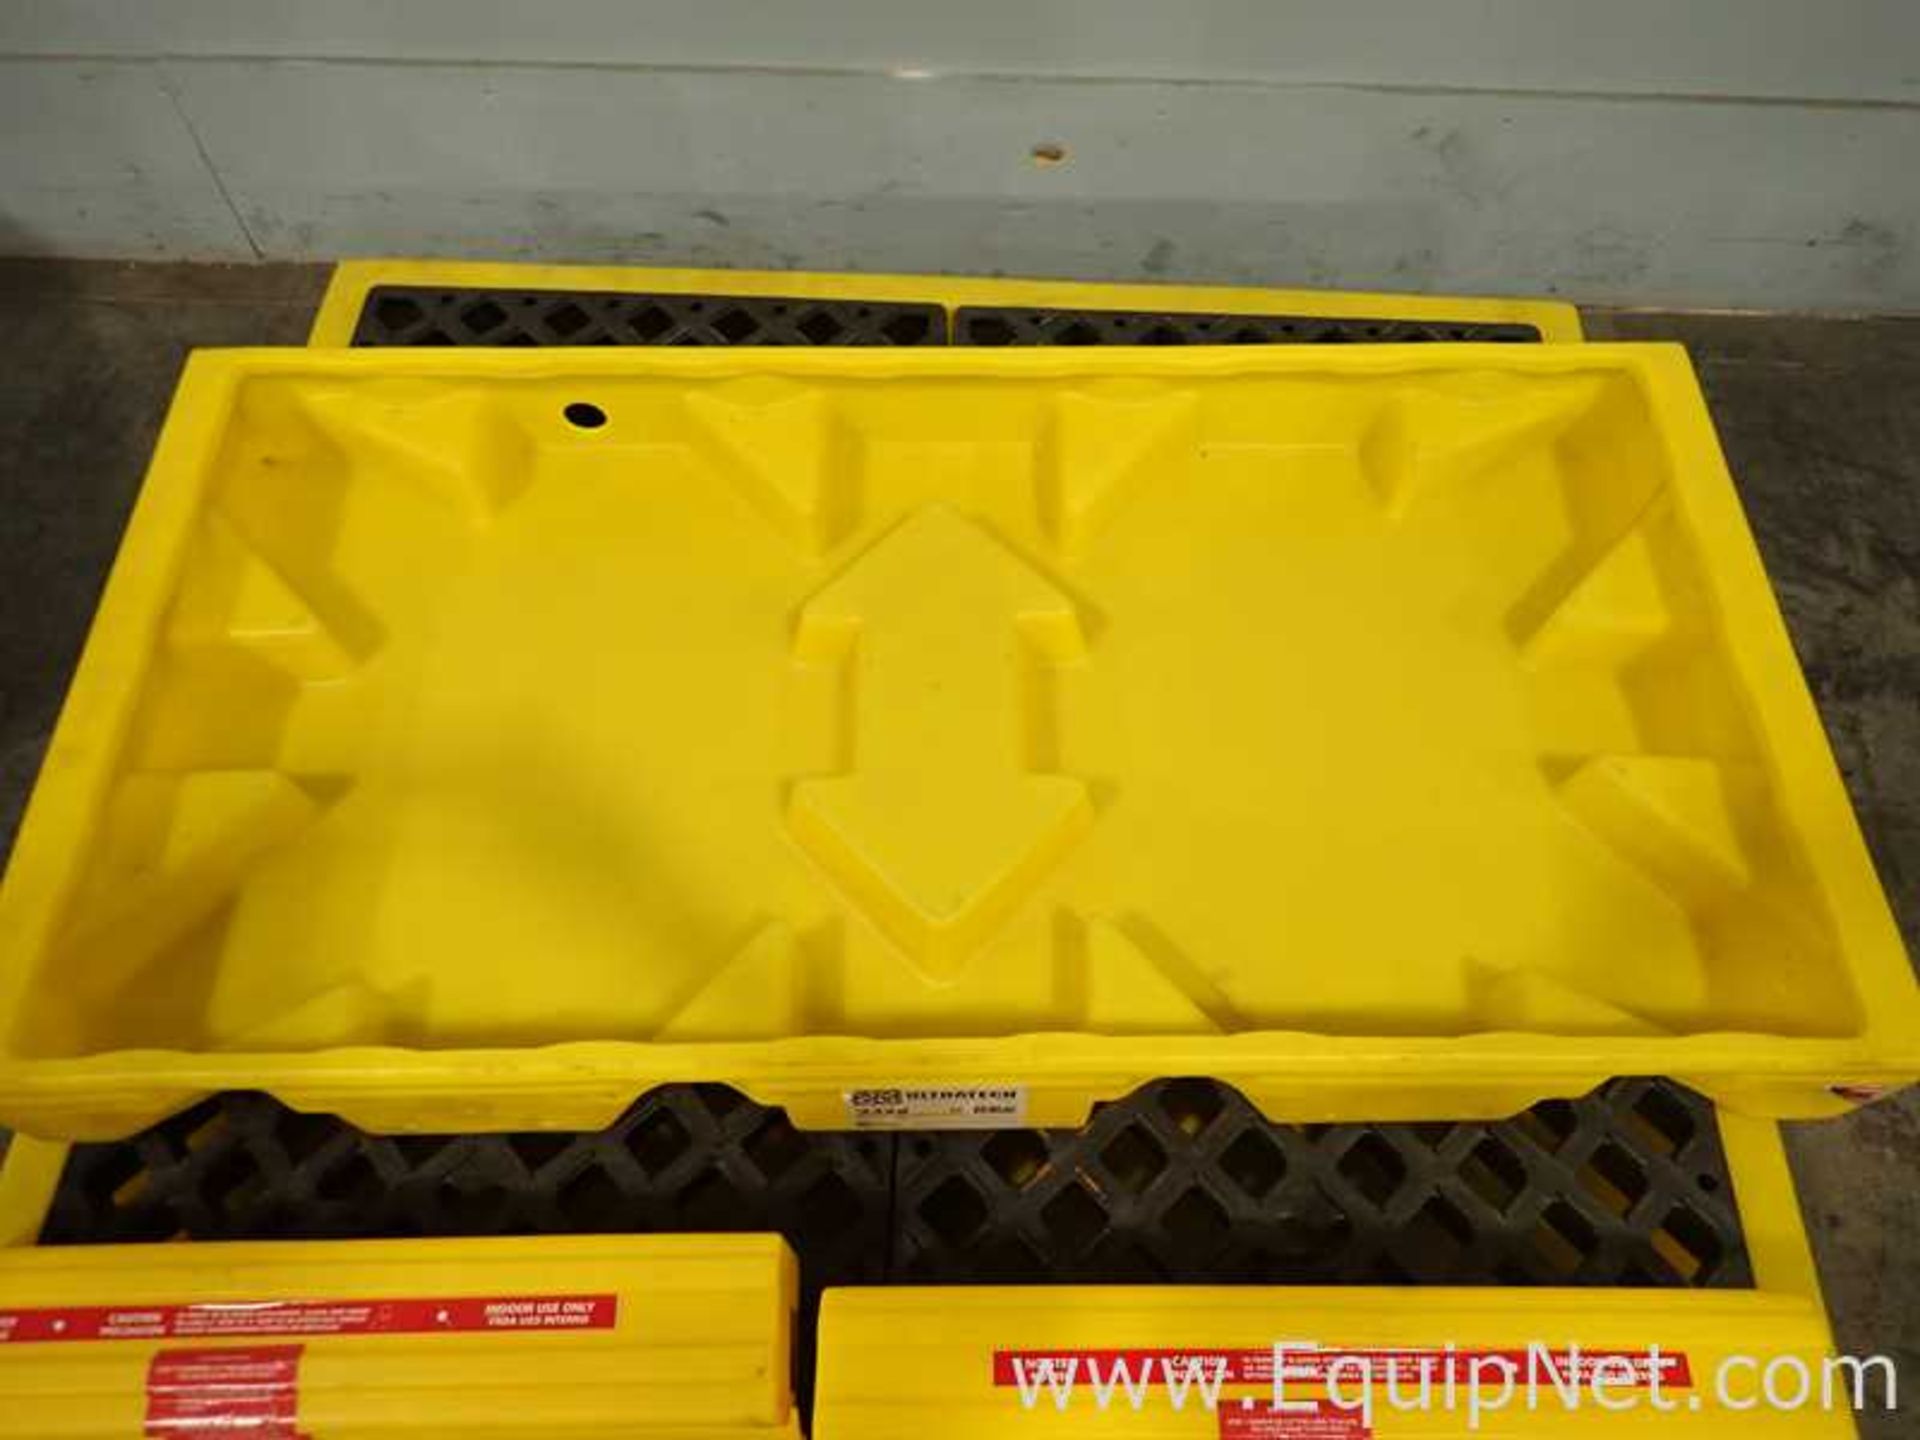 Ultratech 2330 4-Drum and 2329 2-Drum Spill Pallets - Image 3 of 7